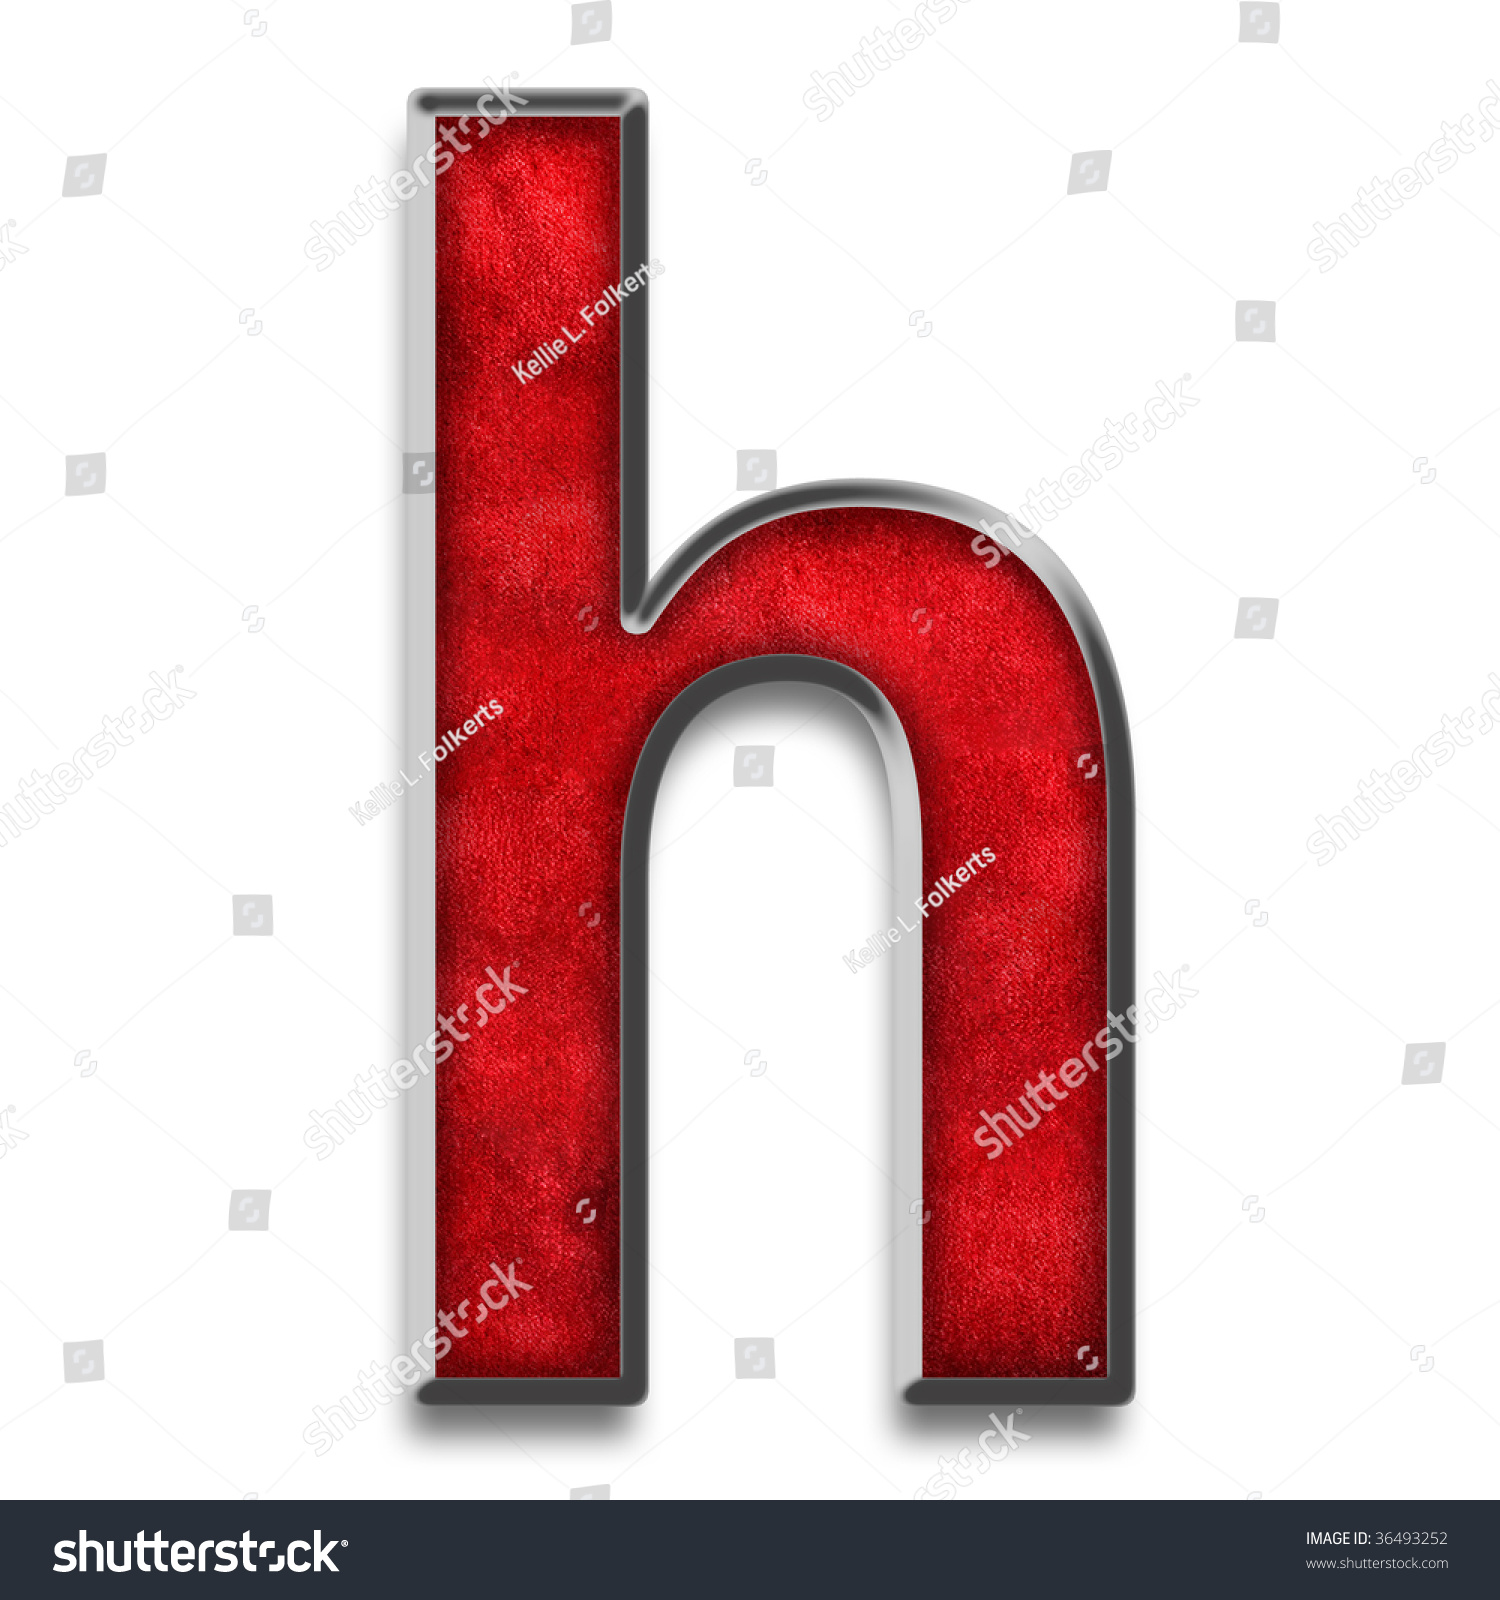 Lowercase H In Red Texture With Metallic Silver Outline Stock Photo ...